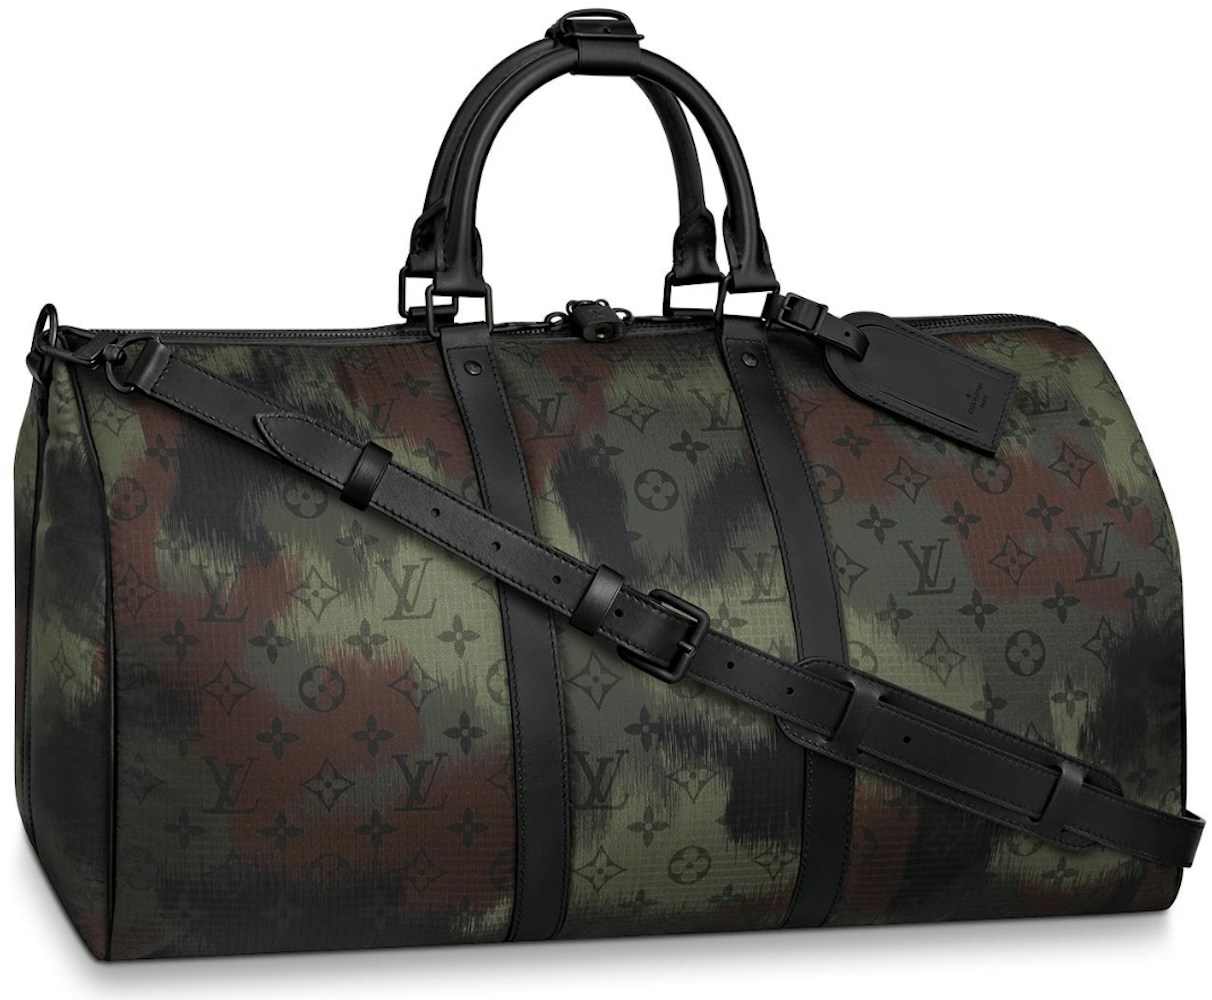 Vuitton Keepall Bandouliere Monogram 50 Black/Green in Nylon with Black-tone